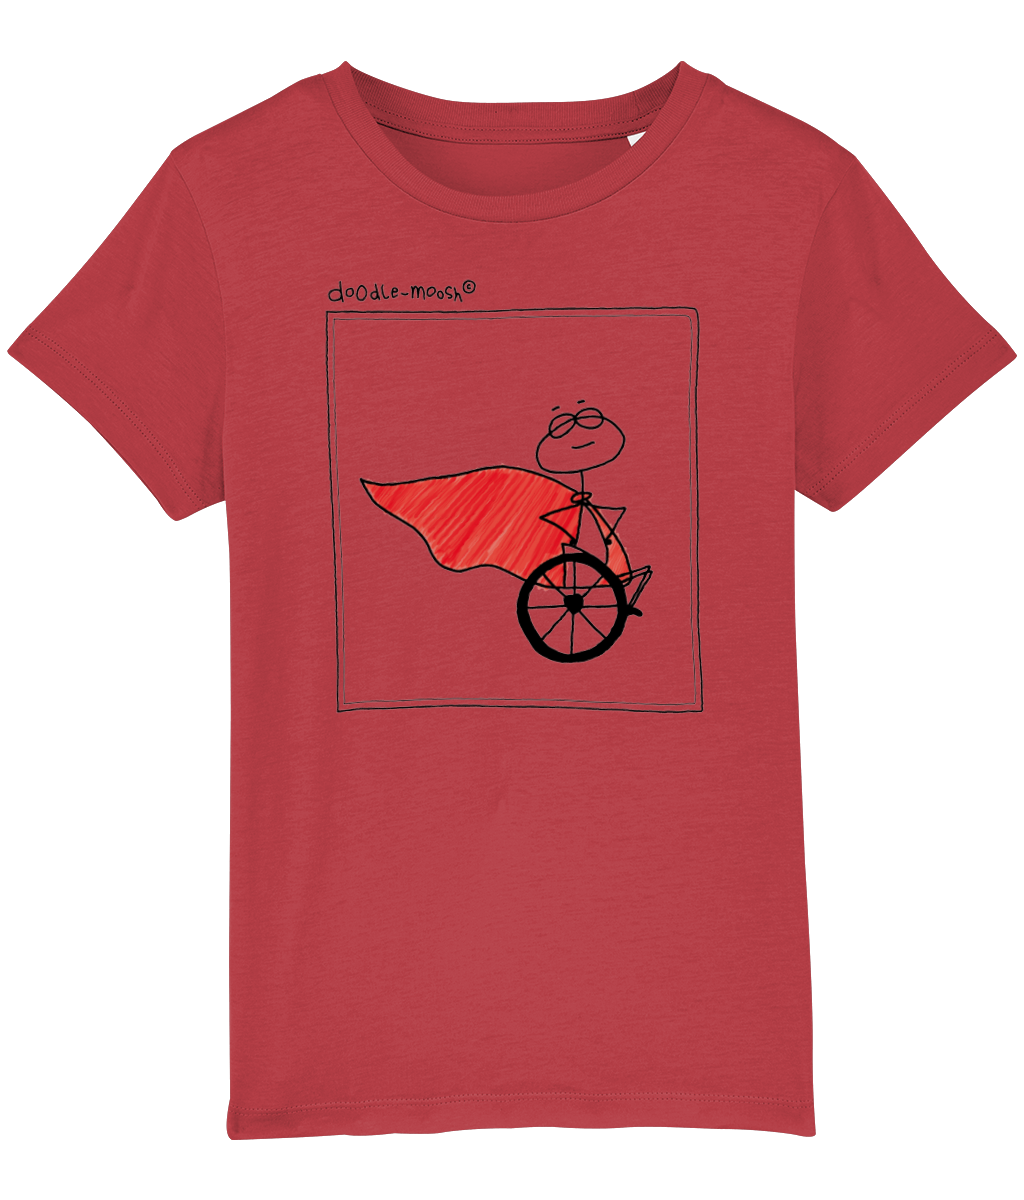 superpower t-shirt, red with black, colorful drawing